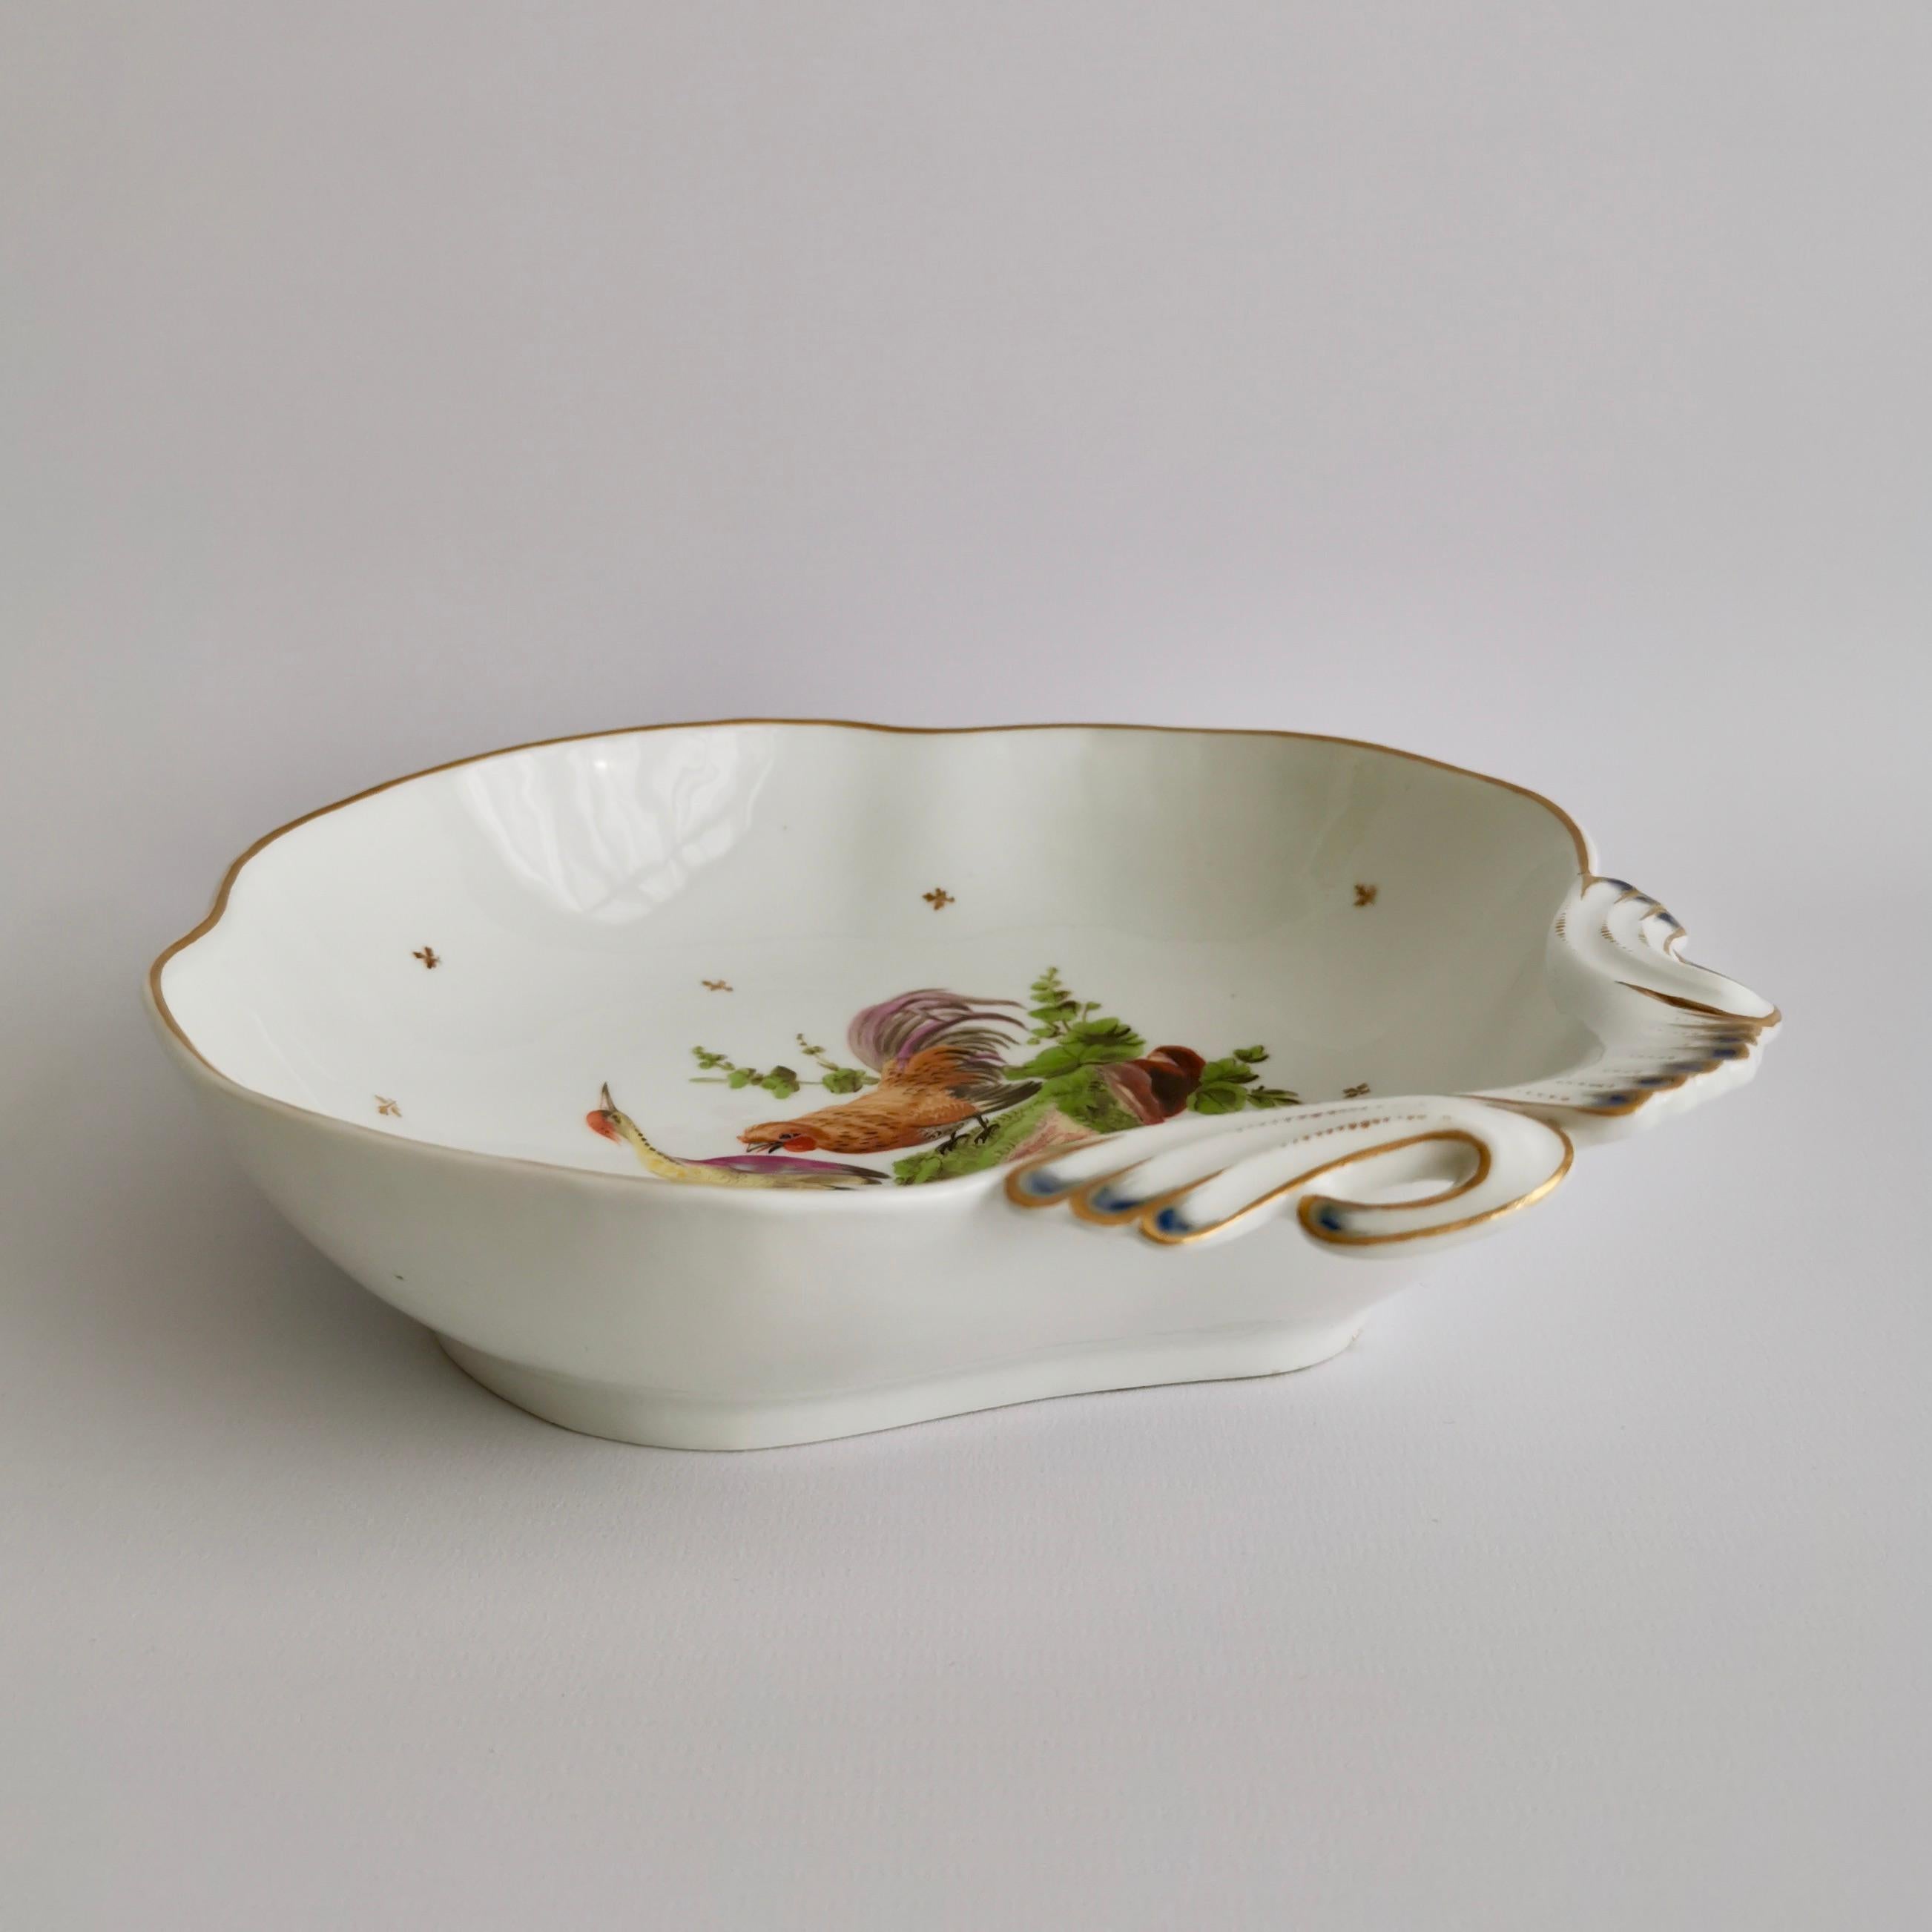 French Porcelain Serving Dish, Heron and Cockerel La Fontaine, circa 1820 For Sale 1